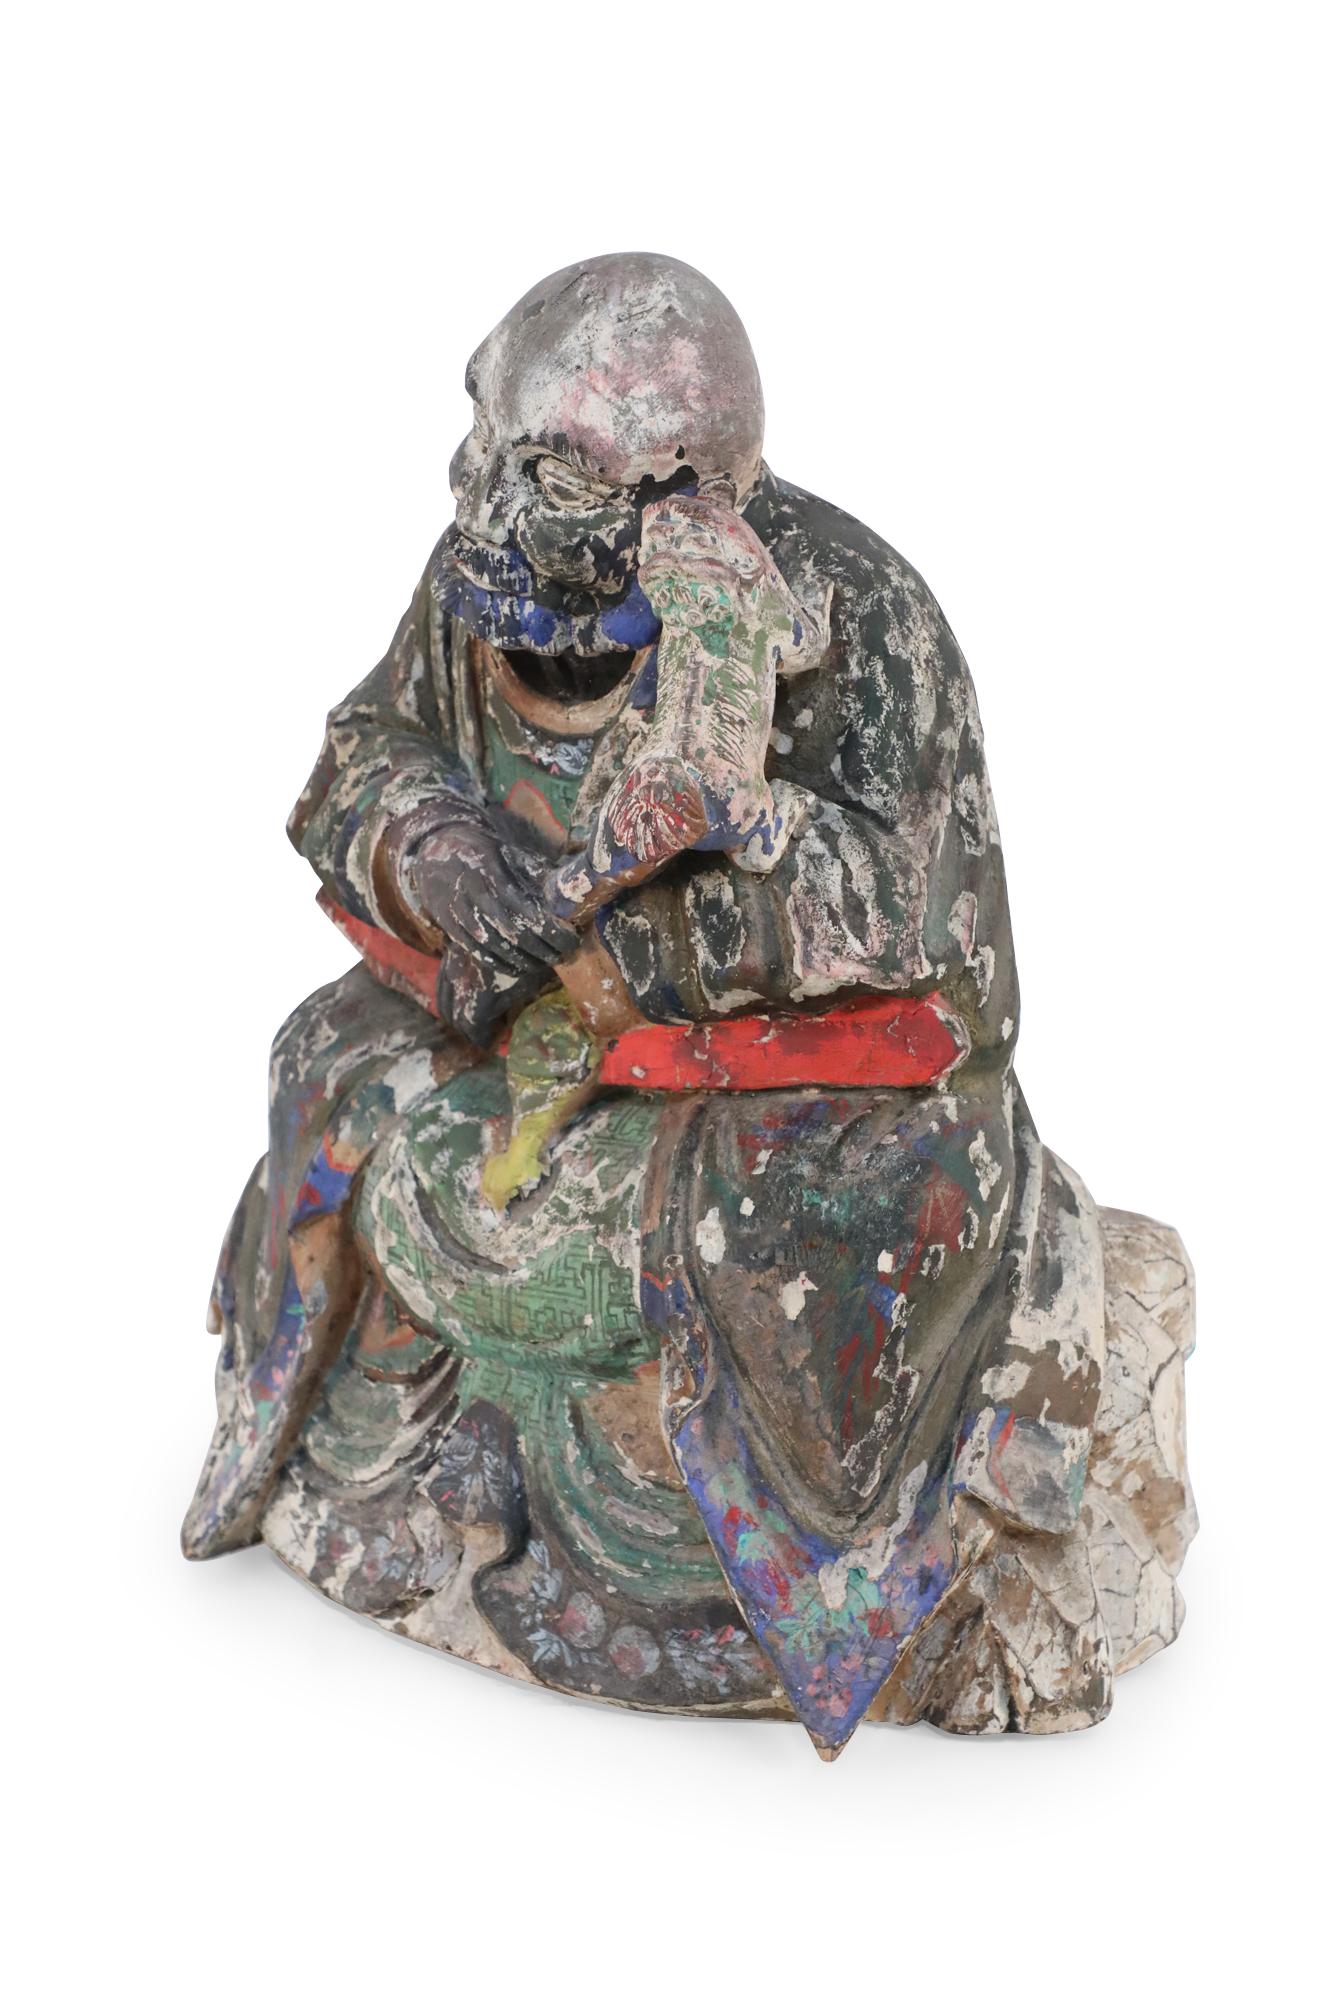 Antique Chinese (early 20th Century, Republic of China) clay Buddha sculpture with painted details in red, green, and blue.
    